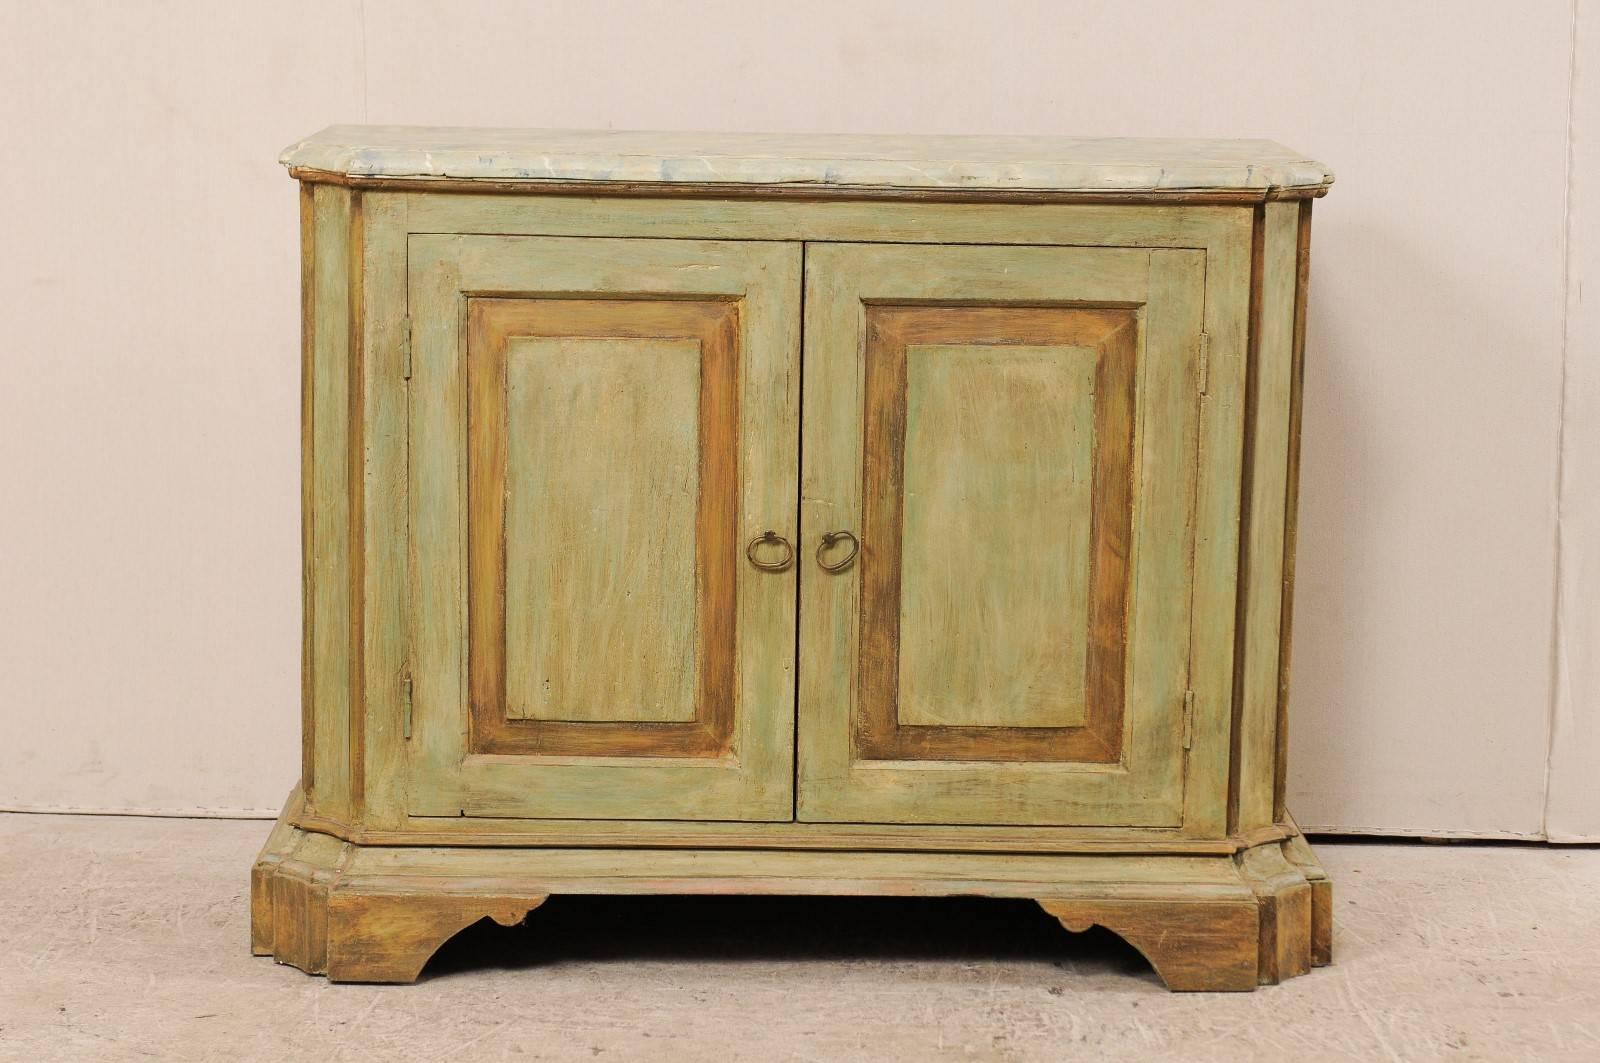 A custom American two-door painted wood buffet console. This vintage Italian style custom buffet cabinet has been fashioned of old reclaimed doors and old wood. This cabinet features a faux marbled top, two doors, concave and canted side posts (with